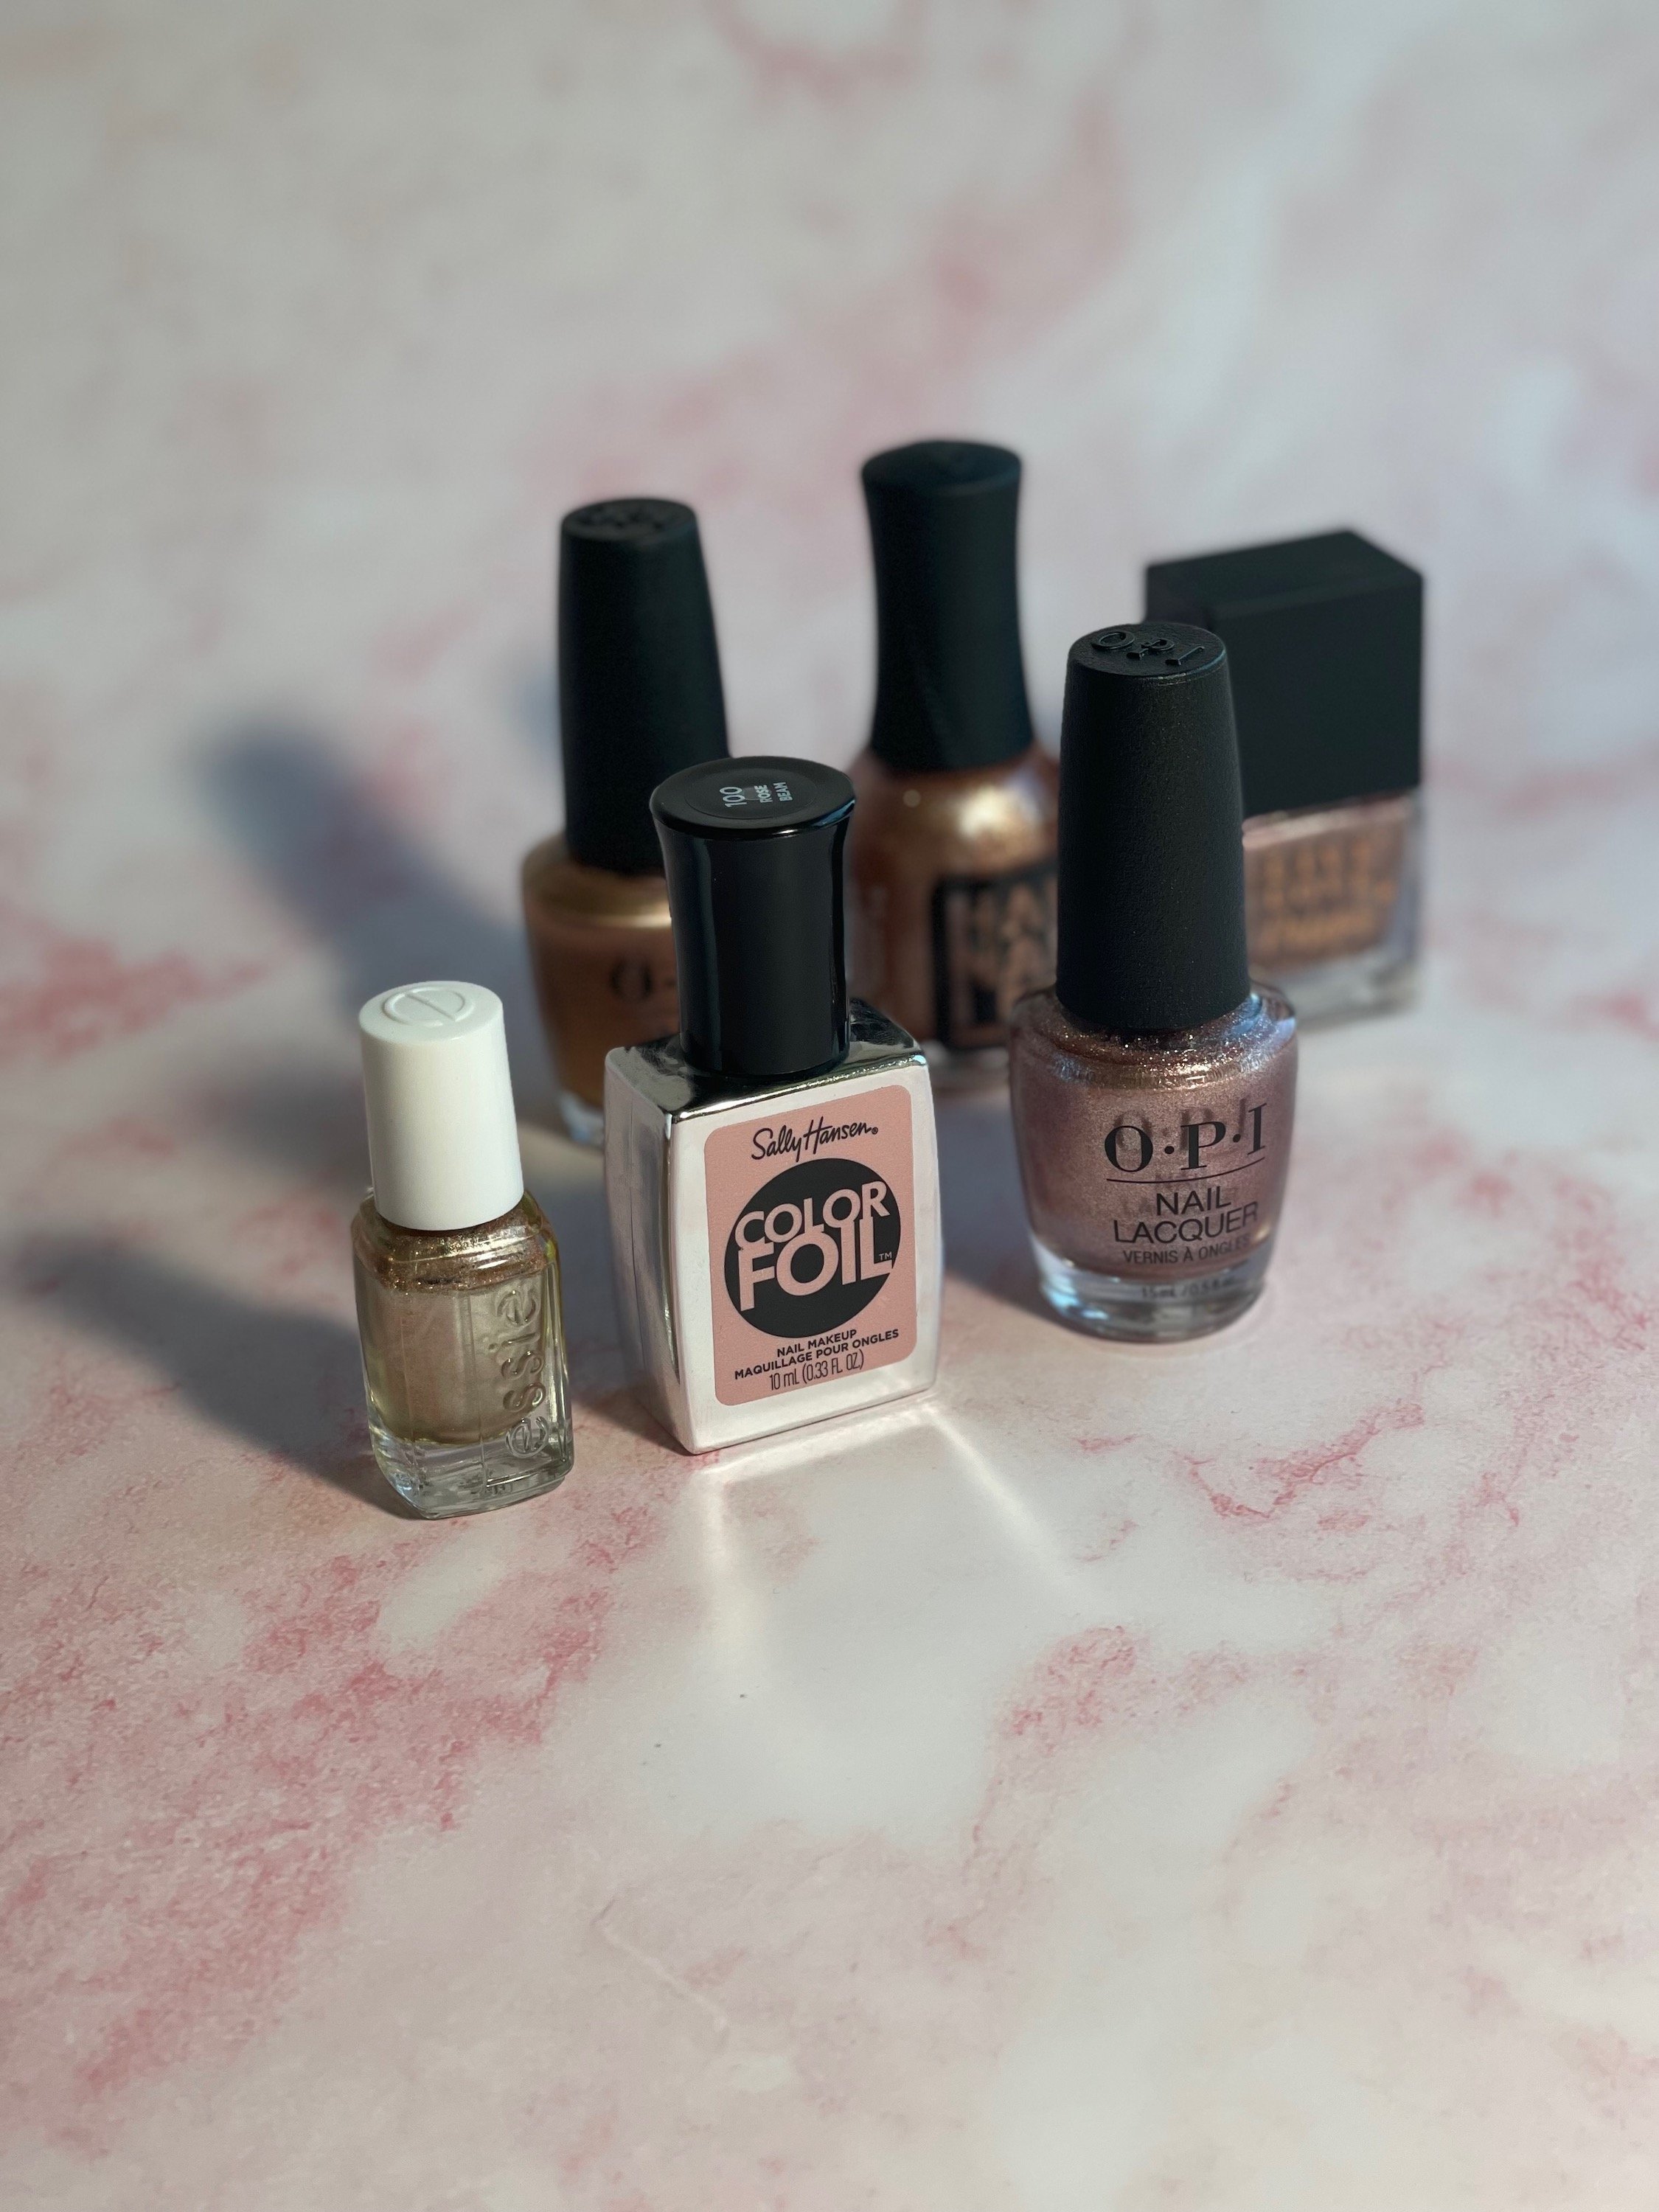 Rose Gold Nails — Lots of Lacquer